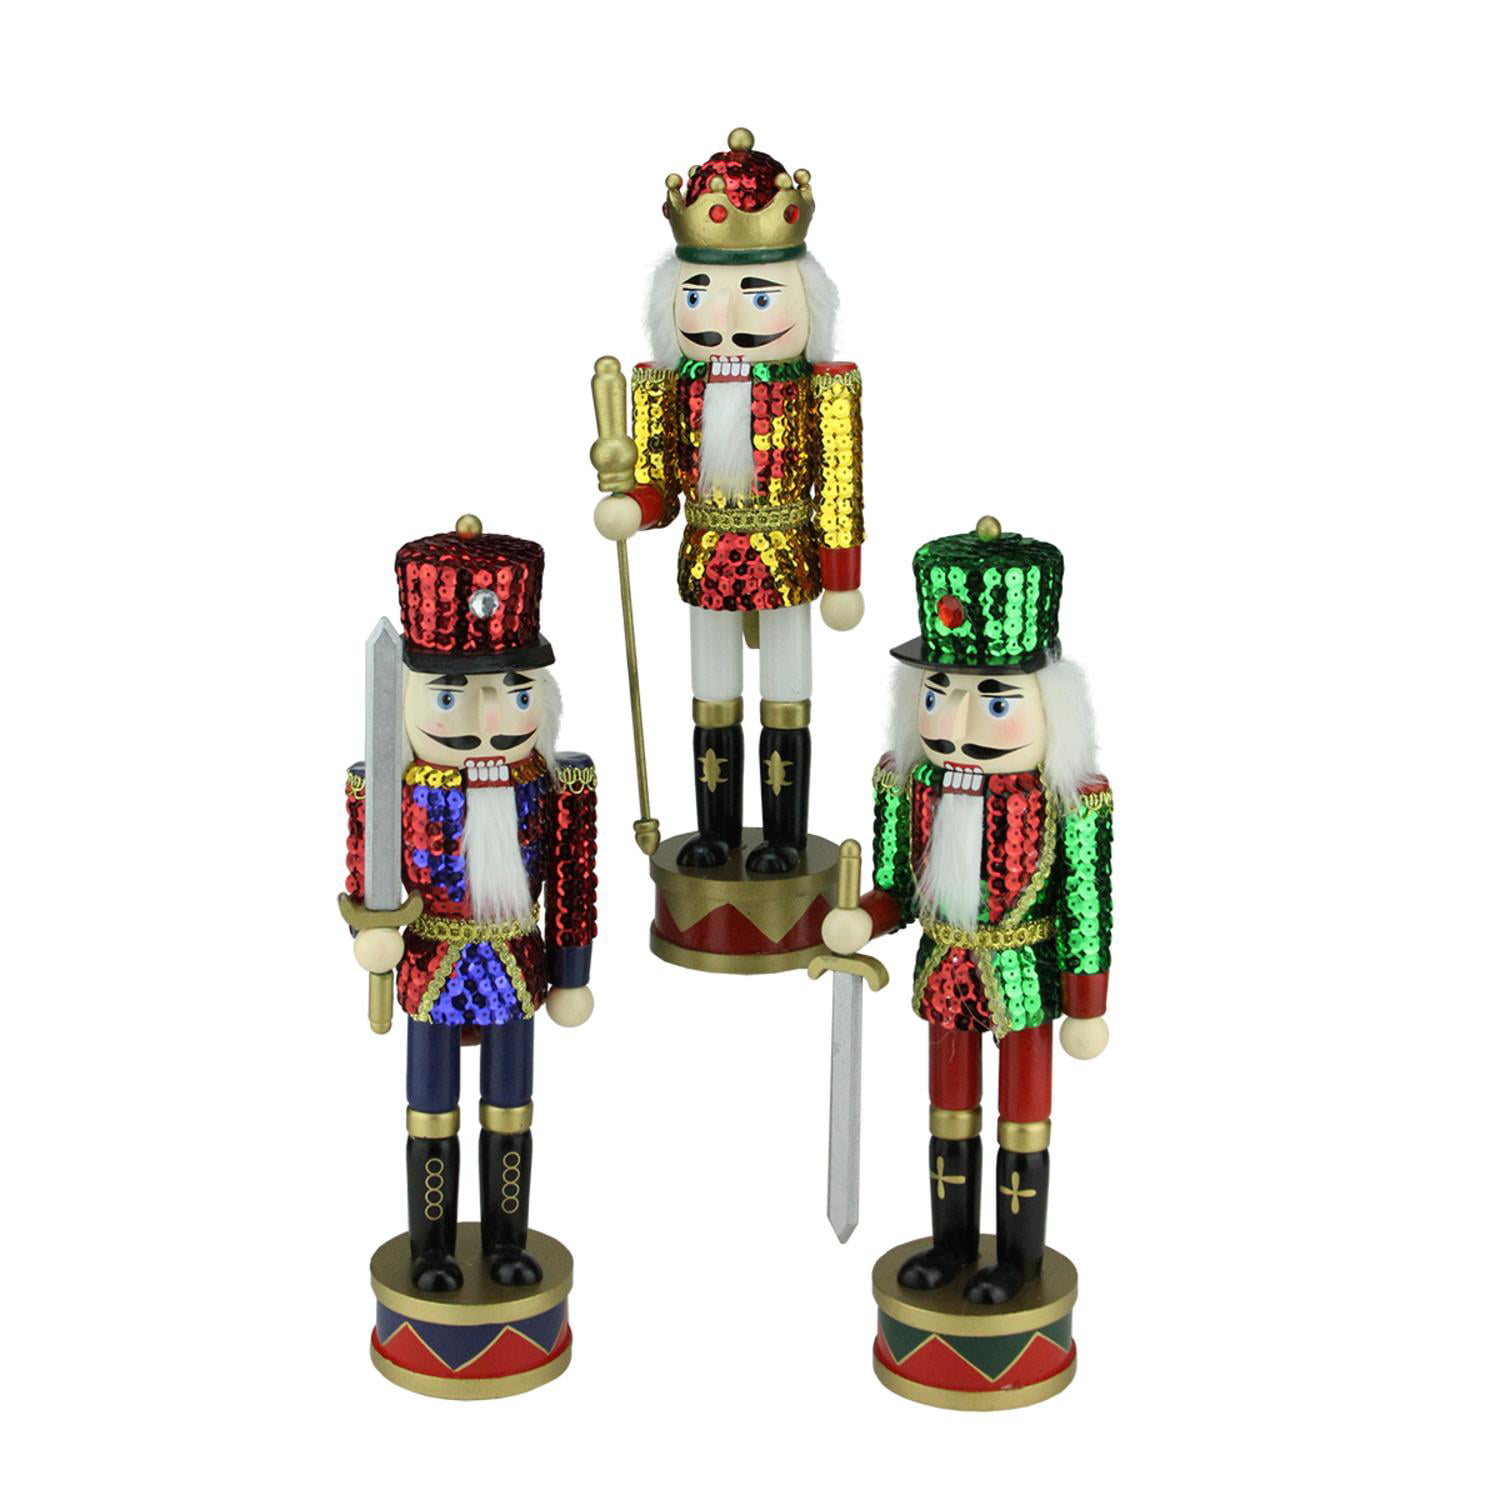 14.5" Walnut Soldier Wood Nutcracker Soldier Xmas Table Decoration By One Set 